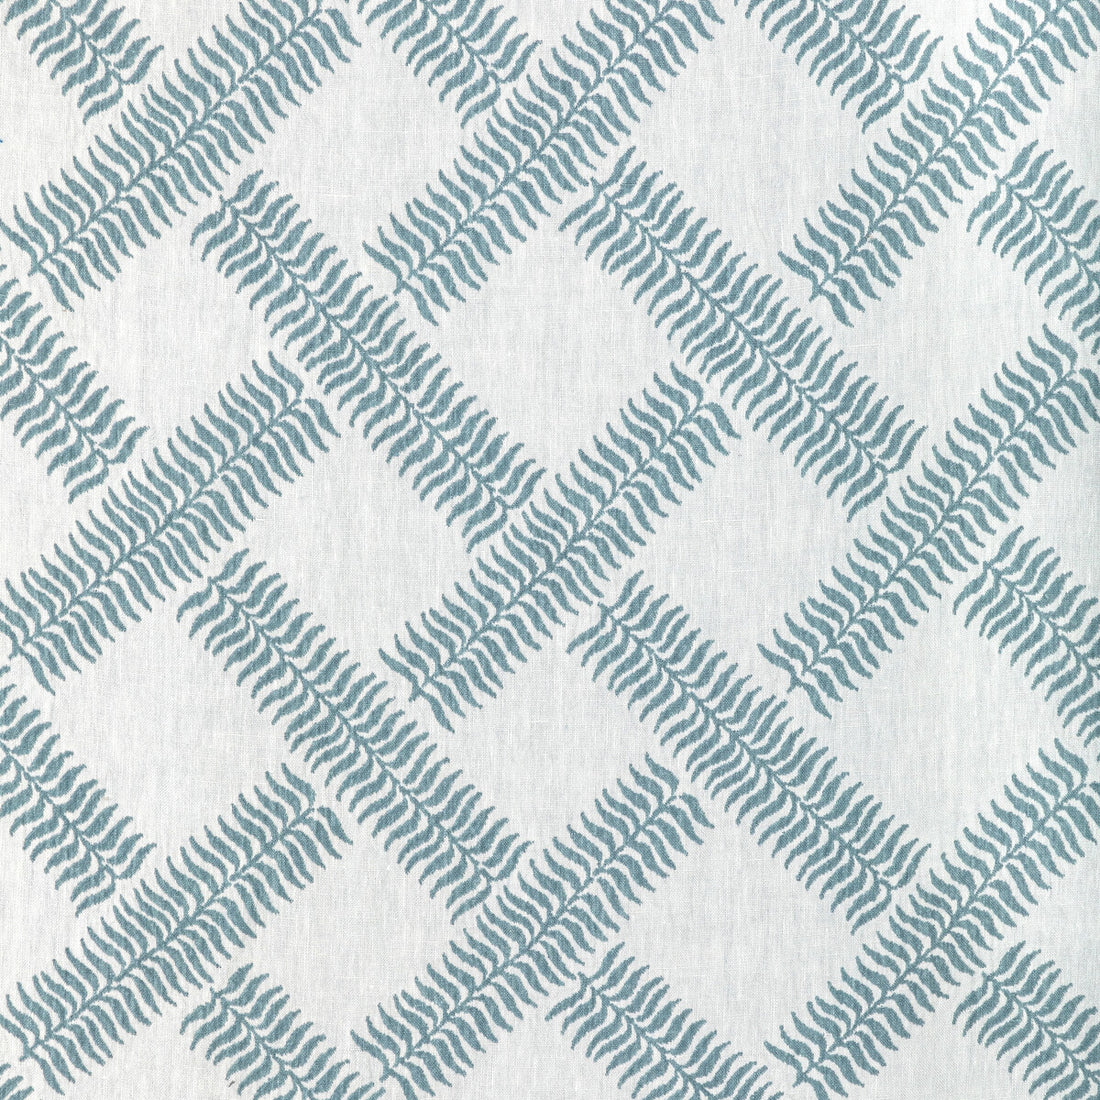 Garden Trellis Weave fabric in sky color - pattern 2022105.1511.0 - by Lee Jofa in the Sarah Bartholomew collection